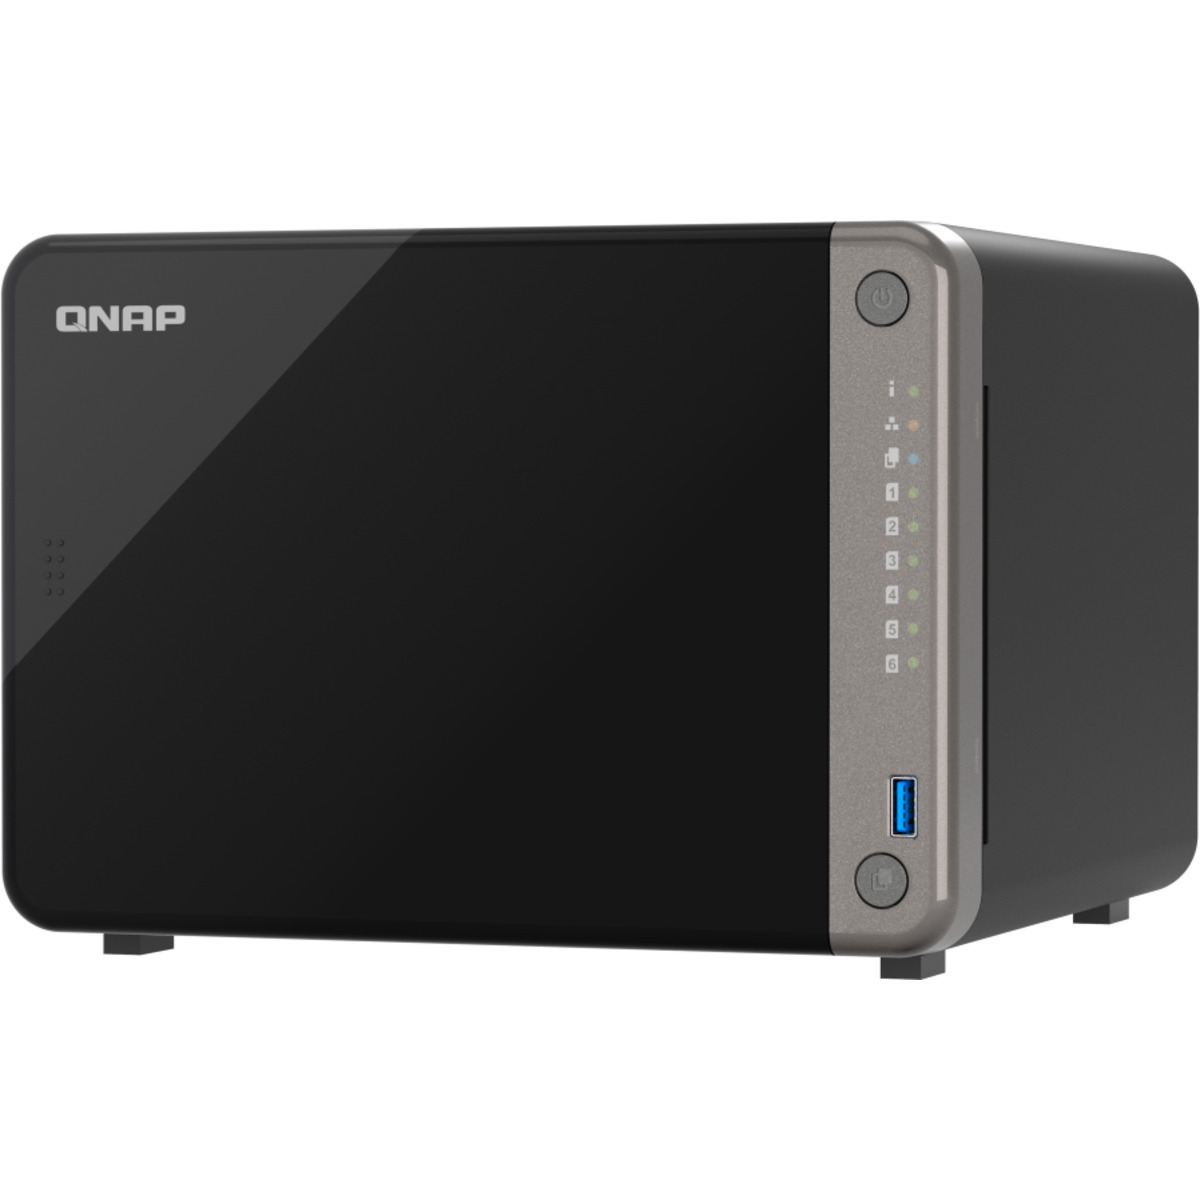 QNAP TS-AI642 48tb 6-Bay Desktop Multimedia / Power User / Business NAS - Network Attached Storage Device 3x16tb Seagate IronWolf ST16000VN001 3.5 7200rpm SATA 6Gb/s HDD NAS Class Drives Installed - Burn-In Tested TS-AI642